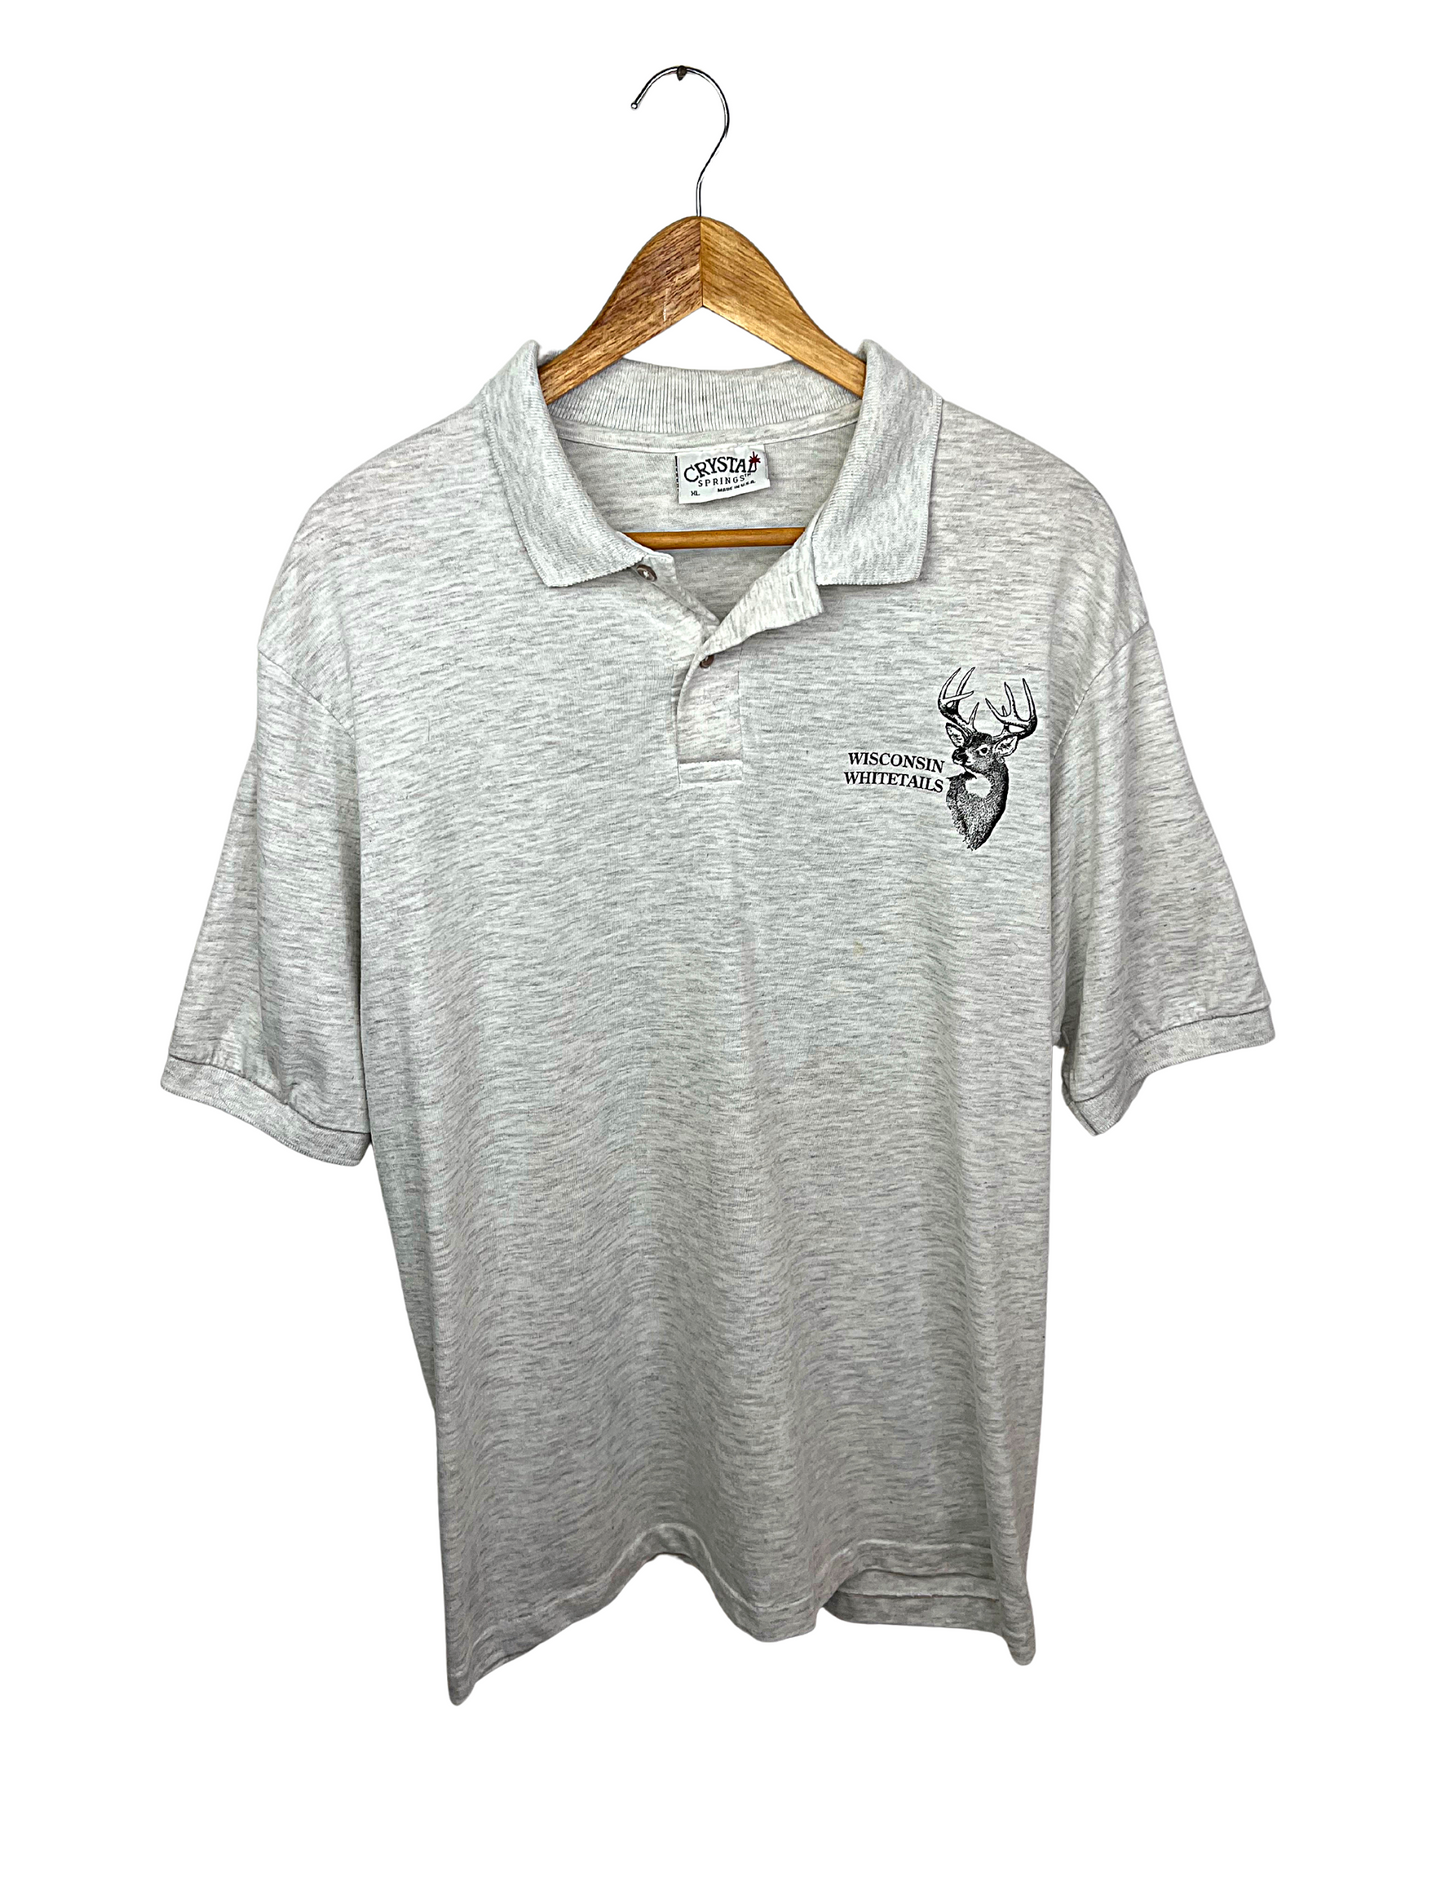 Vintage 90’s Wisconsin WHITETAIL DEER Light Gray Heather 50/50 Henley Polo Size Large